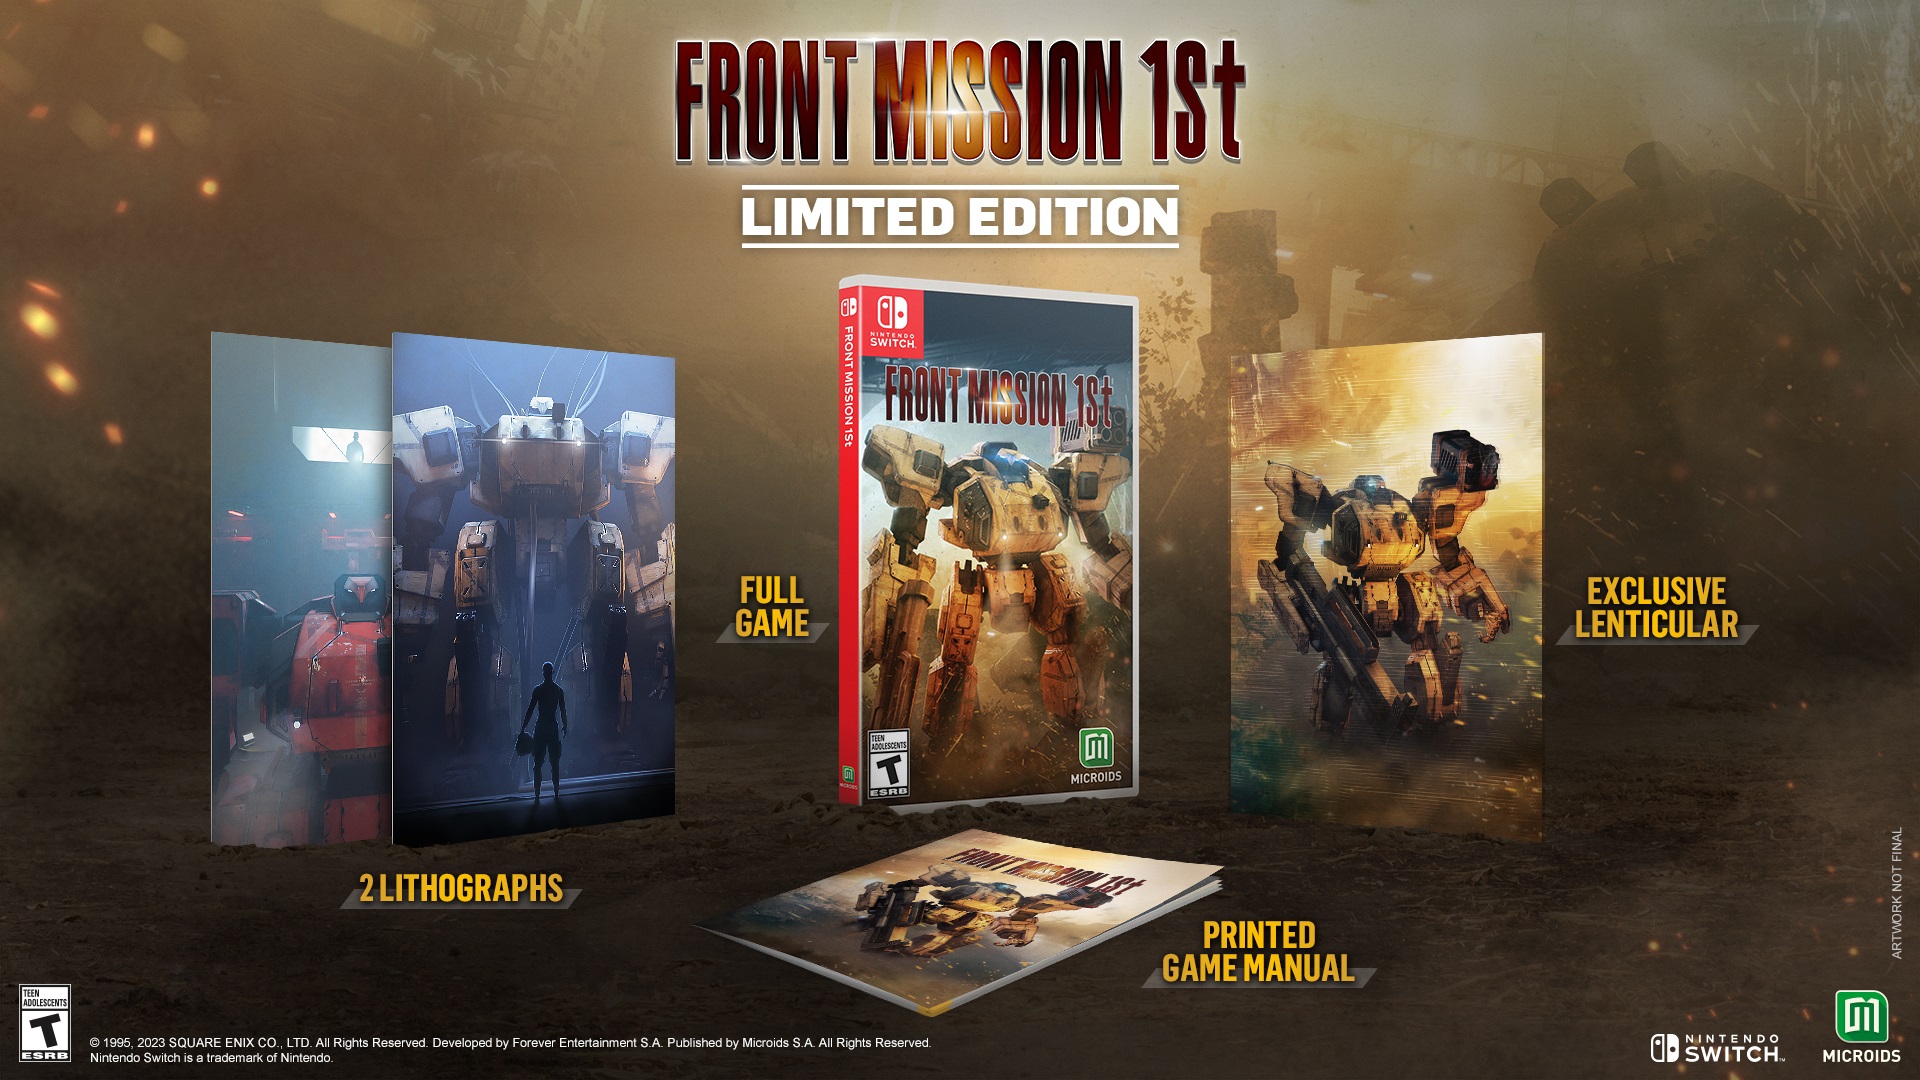 Front Mission 1st: Remake is getting a physical release